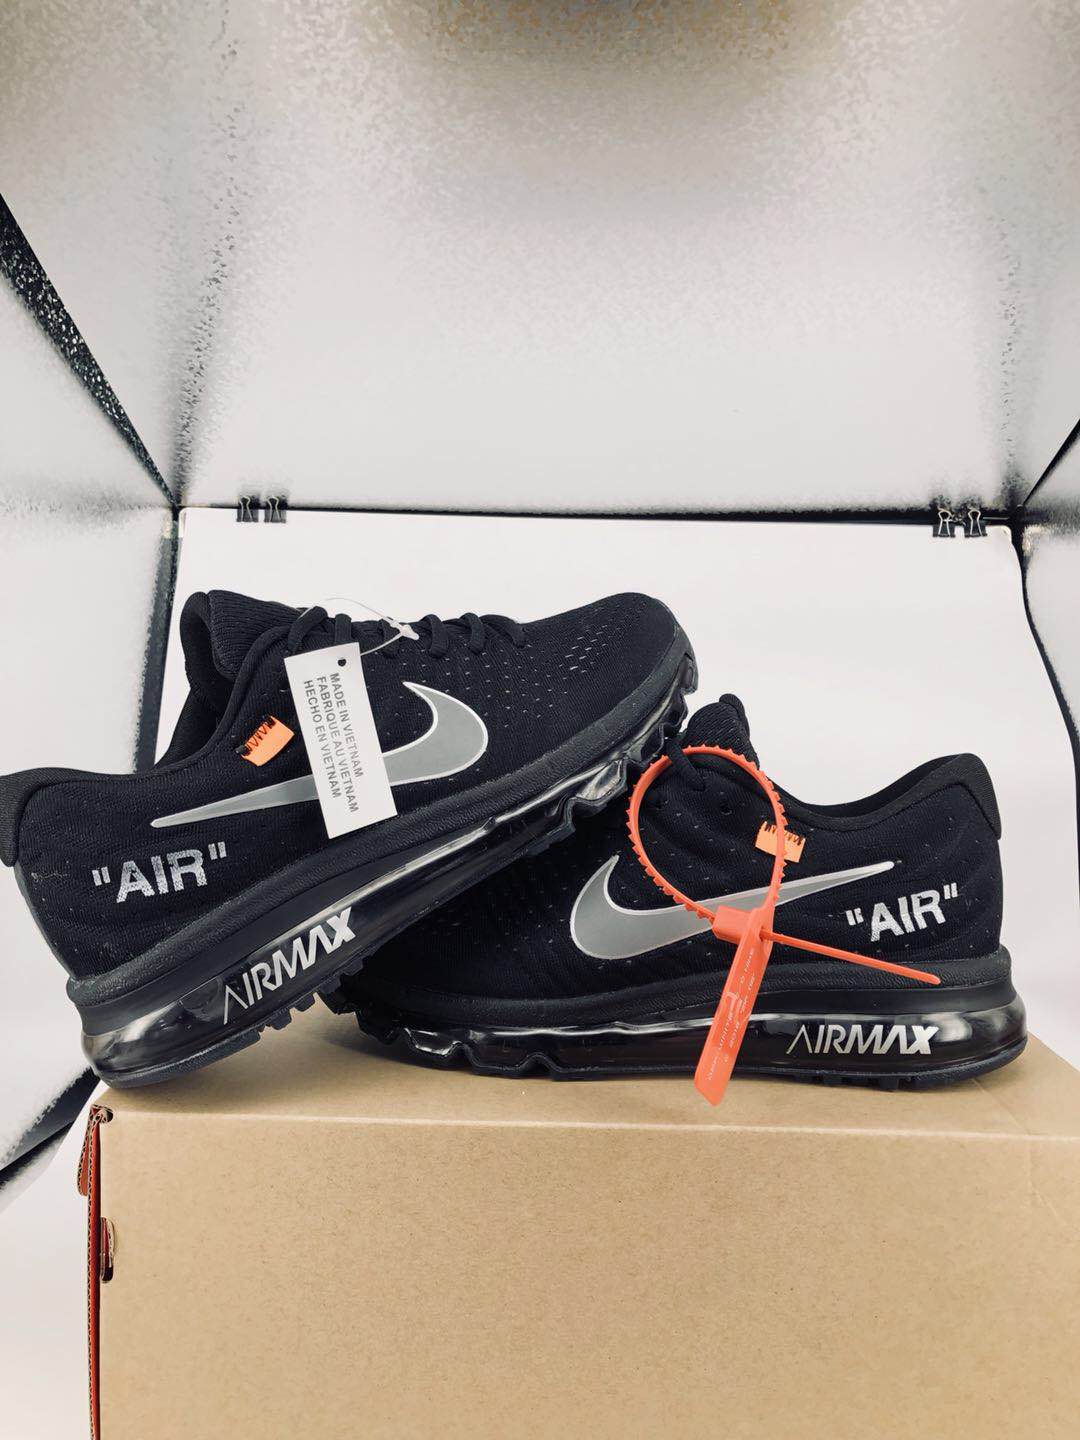 Off-white Nike Air Max 2017 Black Shoes - Click Image to Close